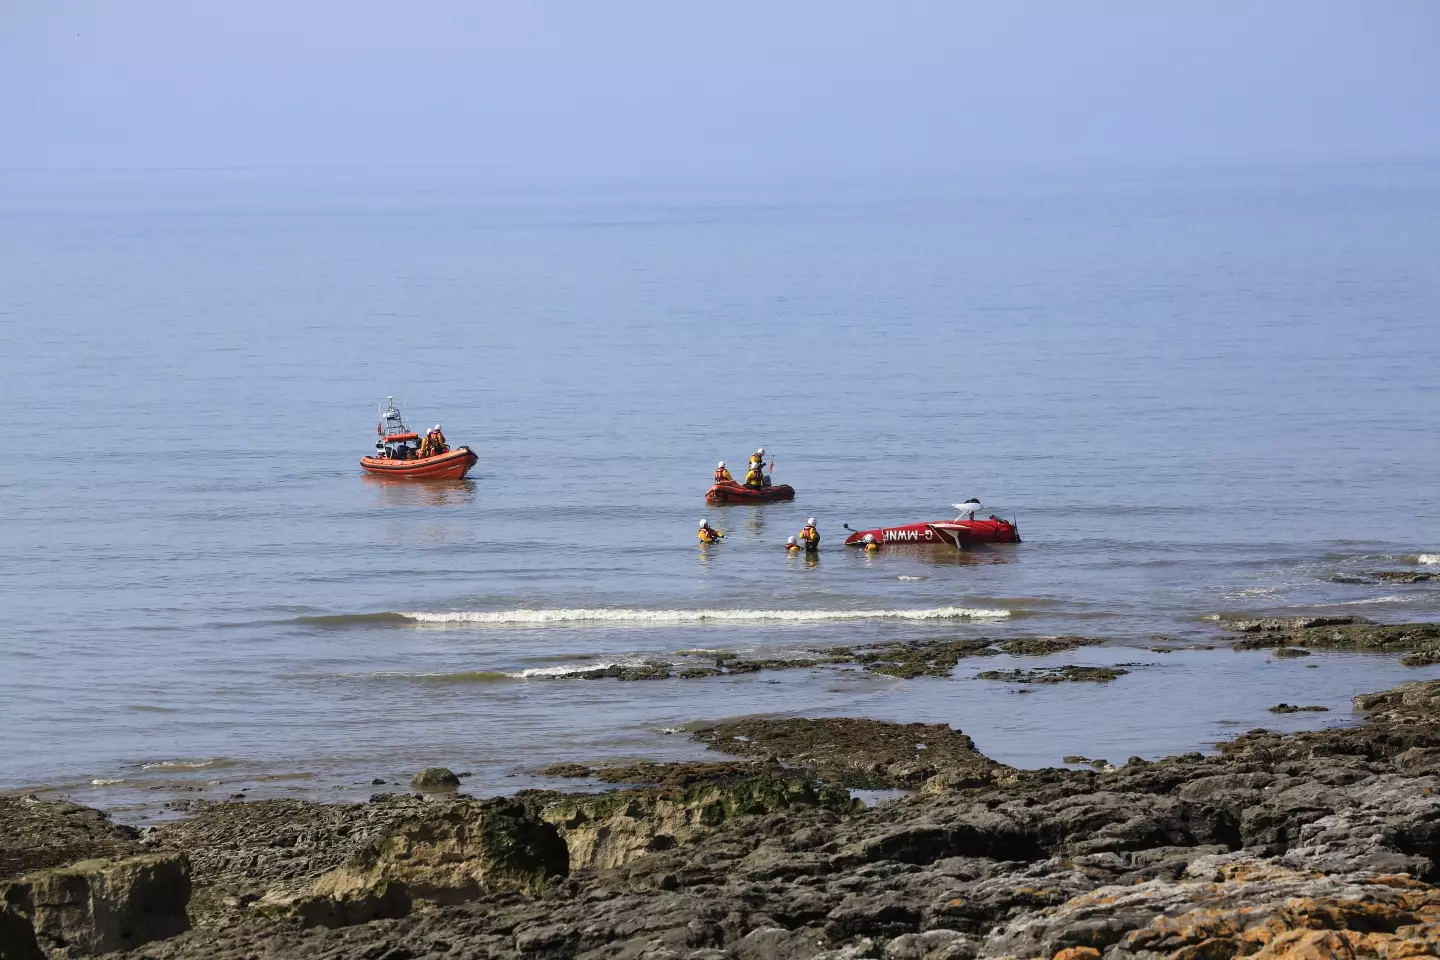 The RNLI responded to a callout in the morning and were able to get the crashed plane's pilot to safety.